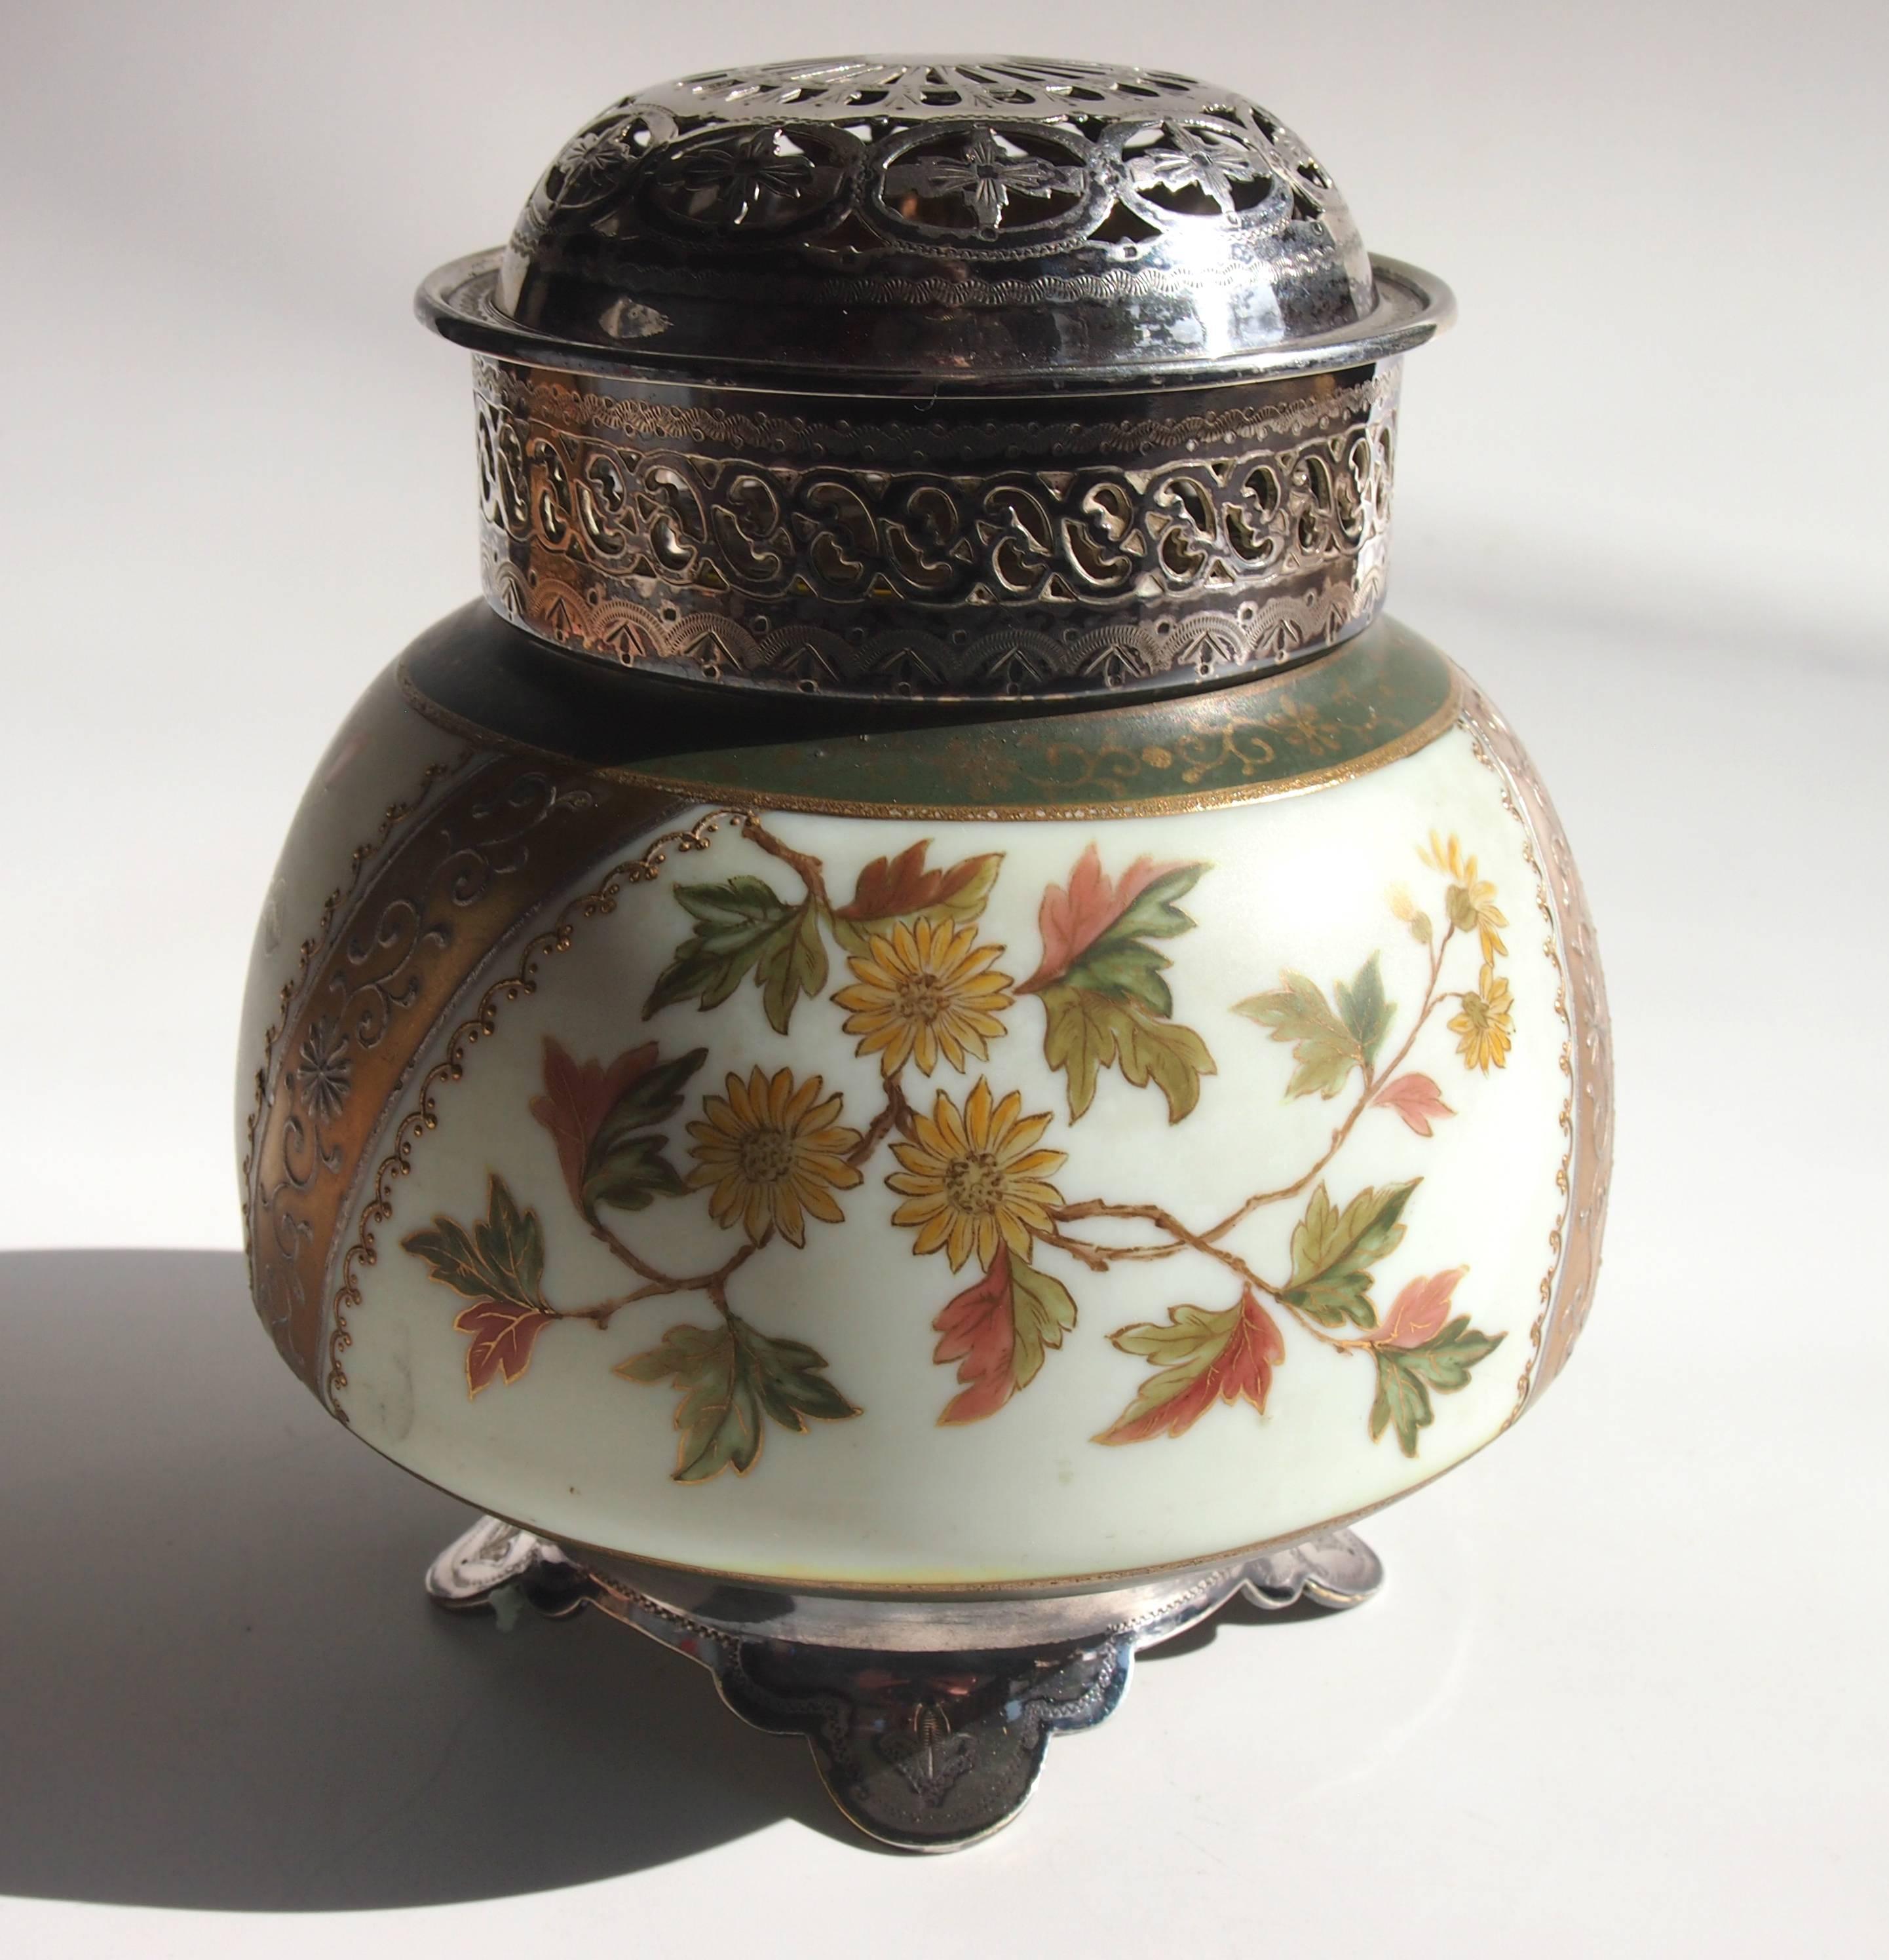 Unusual enameled and gilded Victorian Harrach Potpurri holder with original white metal feet and collar with detachable pierced lid and inner filter. Enameled with green gilded bands and floral decoration.

Harrach has been the backbone of Bohemian,